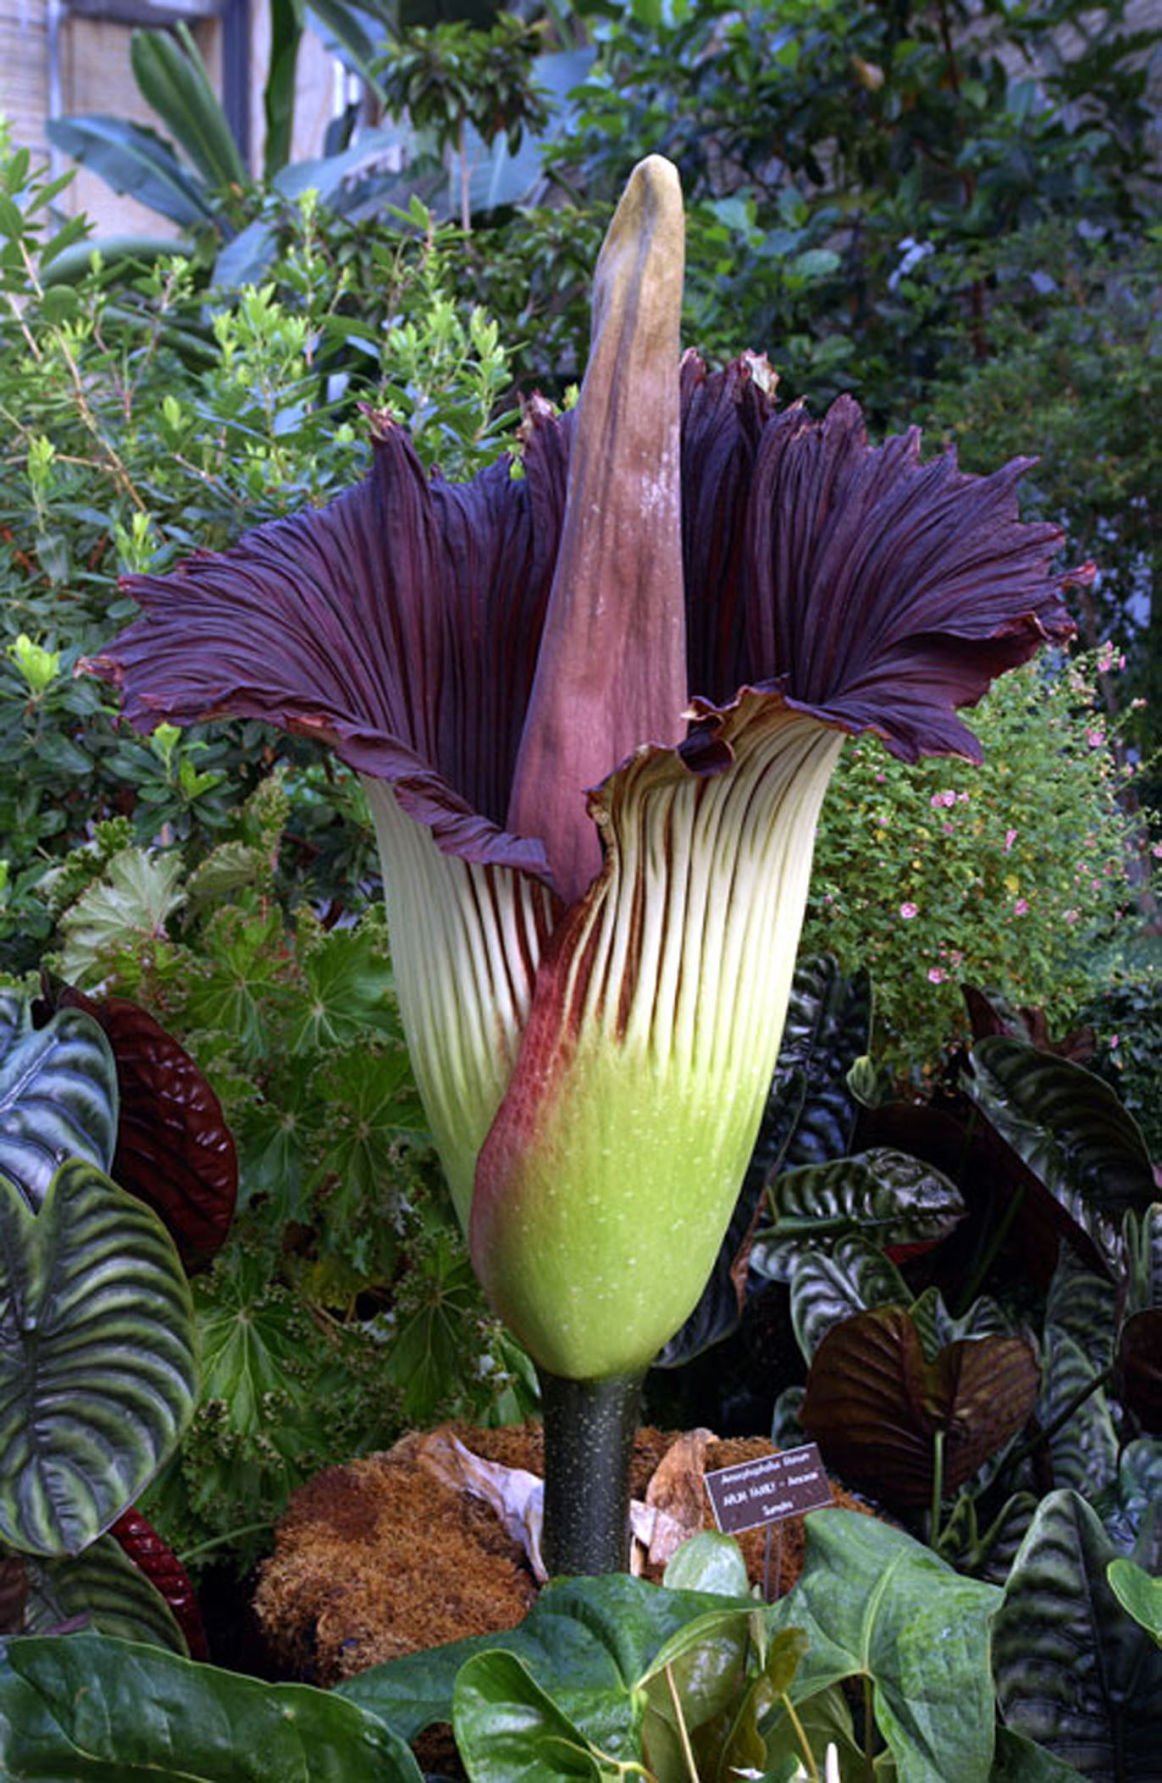 Rare corpse flower ripe for blooming Lifestyles